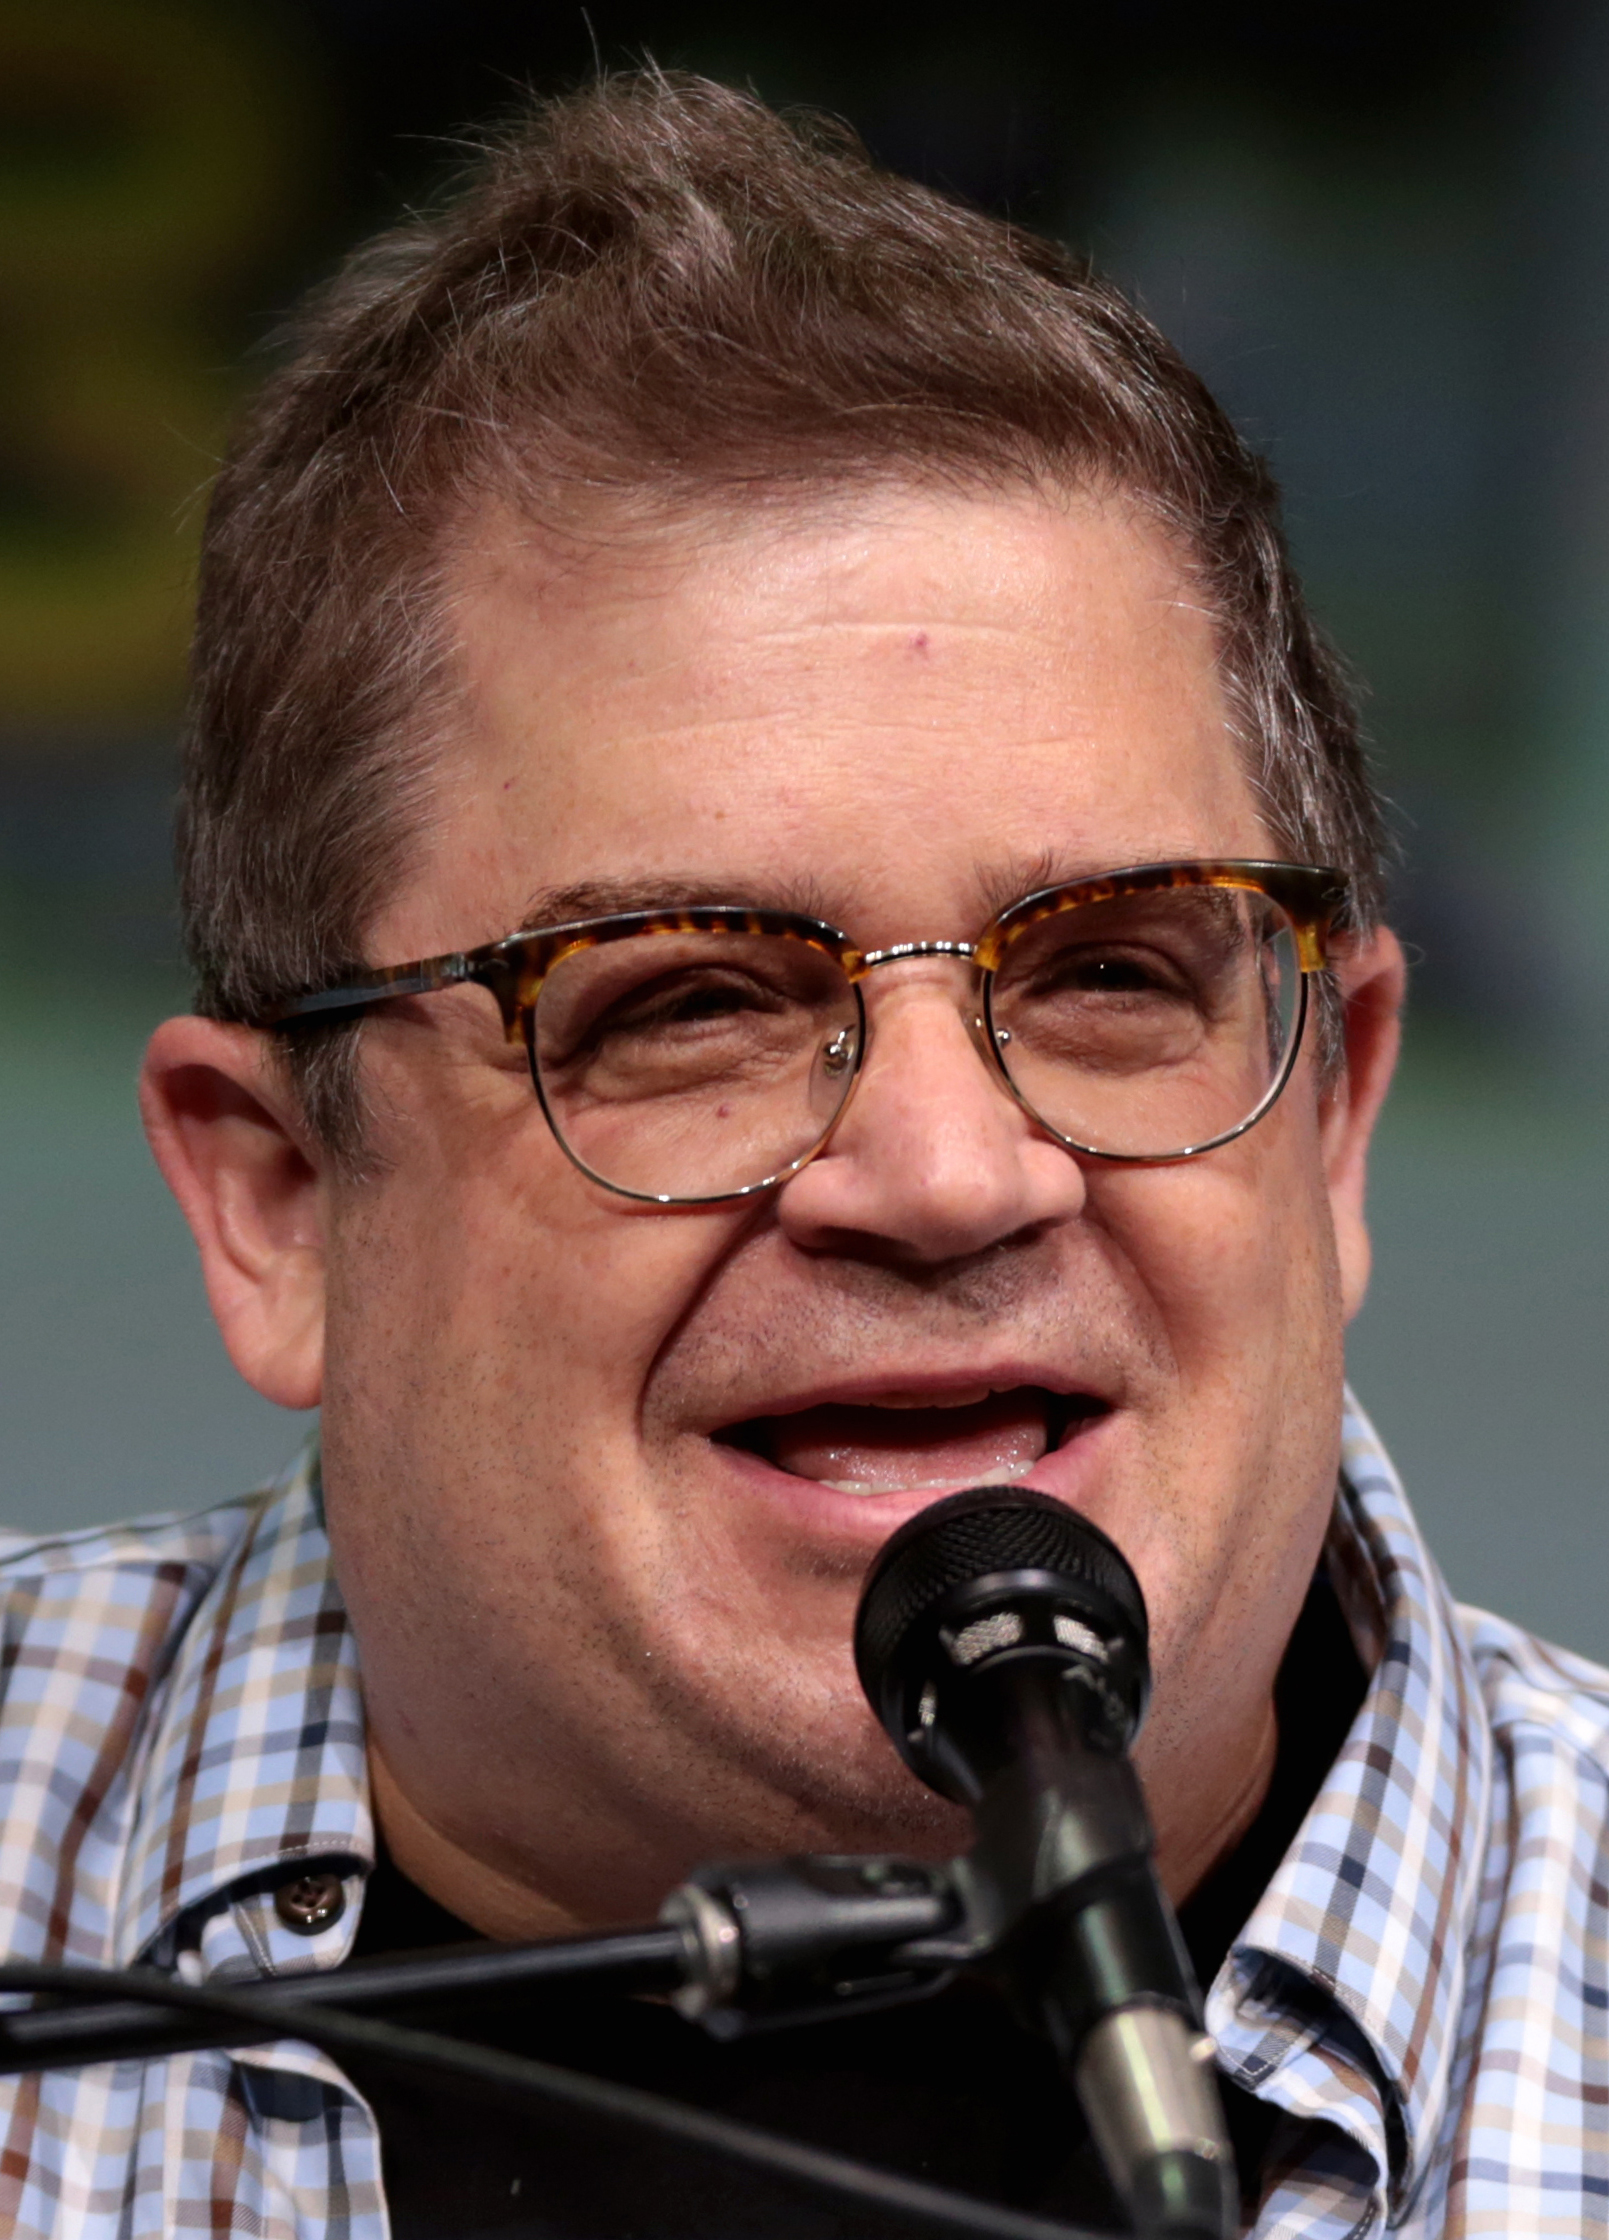 How tall is Patton Oswalt?